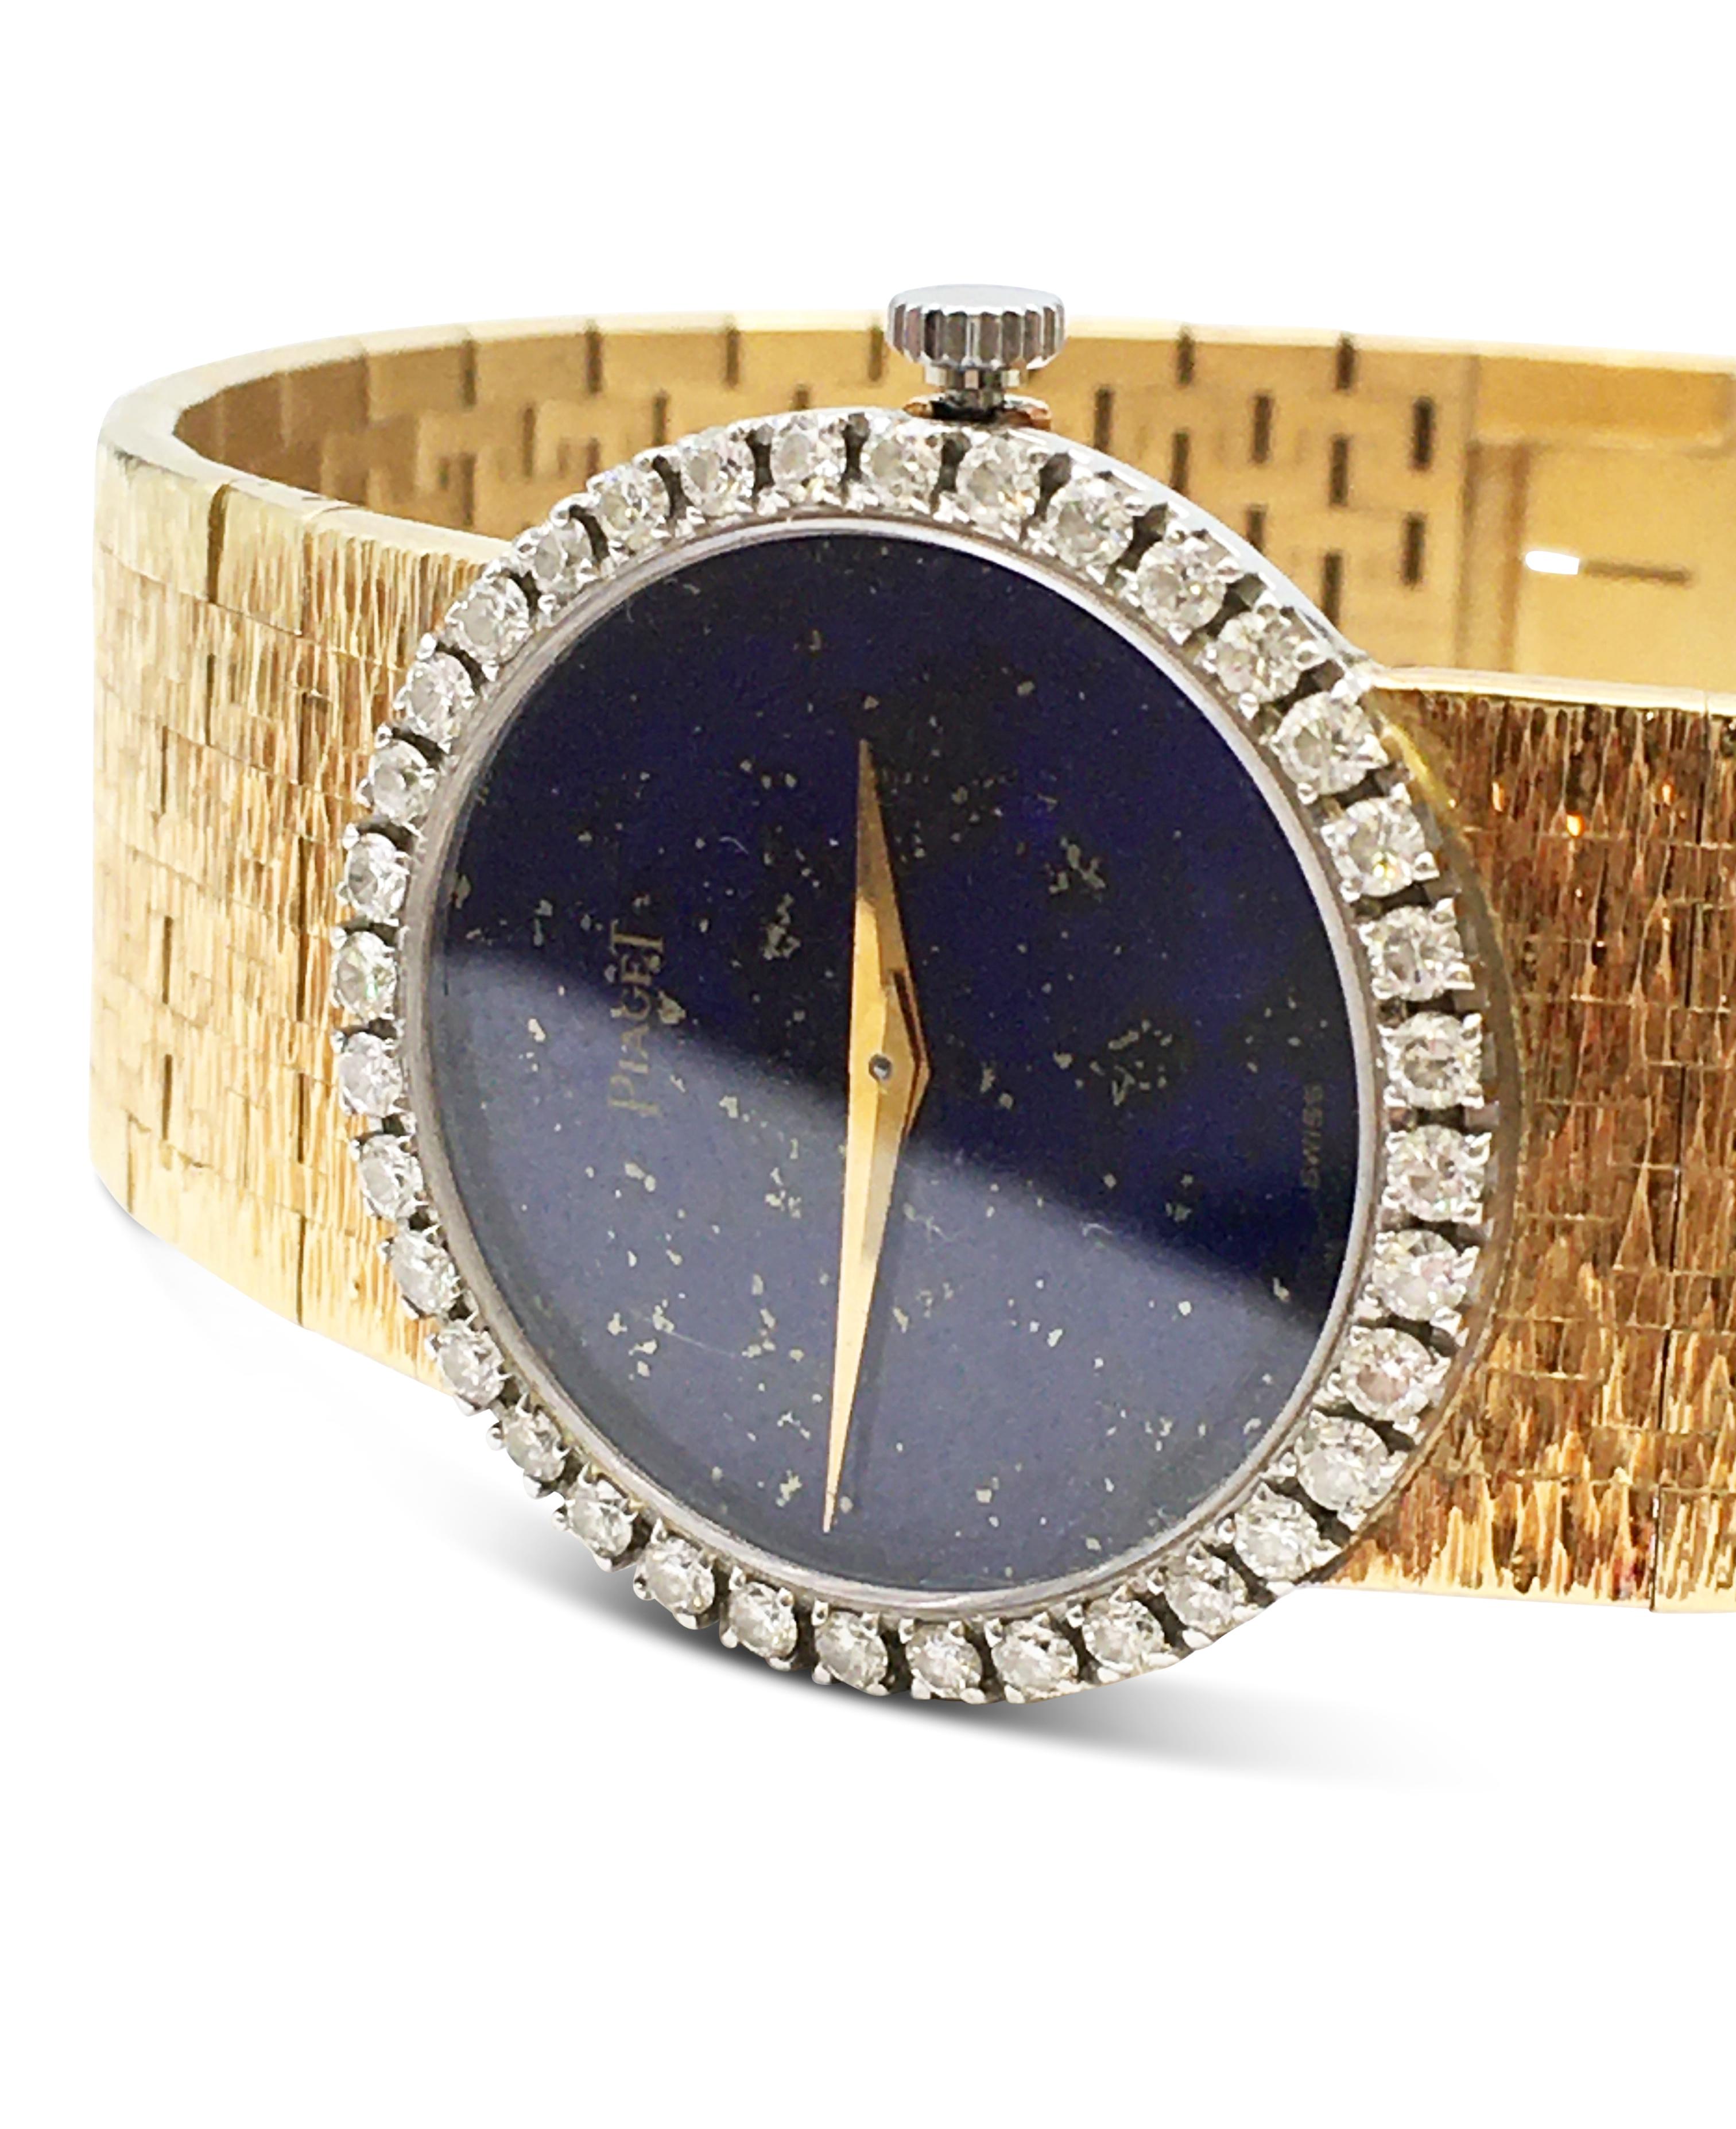 Authentic Piaget ladies watch made in 18 karat yellow gold with a stunning round lapis de lazuli dial. Watch case is an elegant 24mm and the bezel is set with an estimated 0.72 carats of round brilliant cut diamonds (F-G in color, VS clarity). This